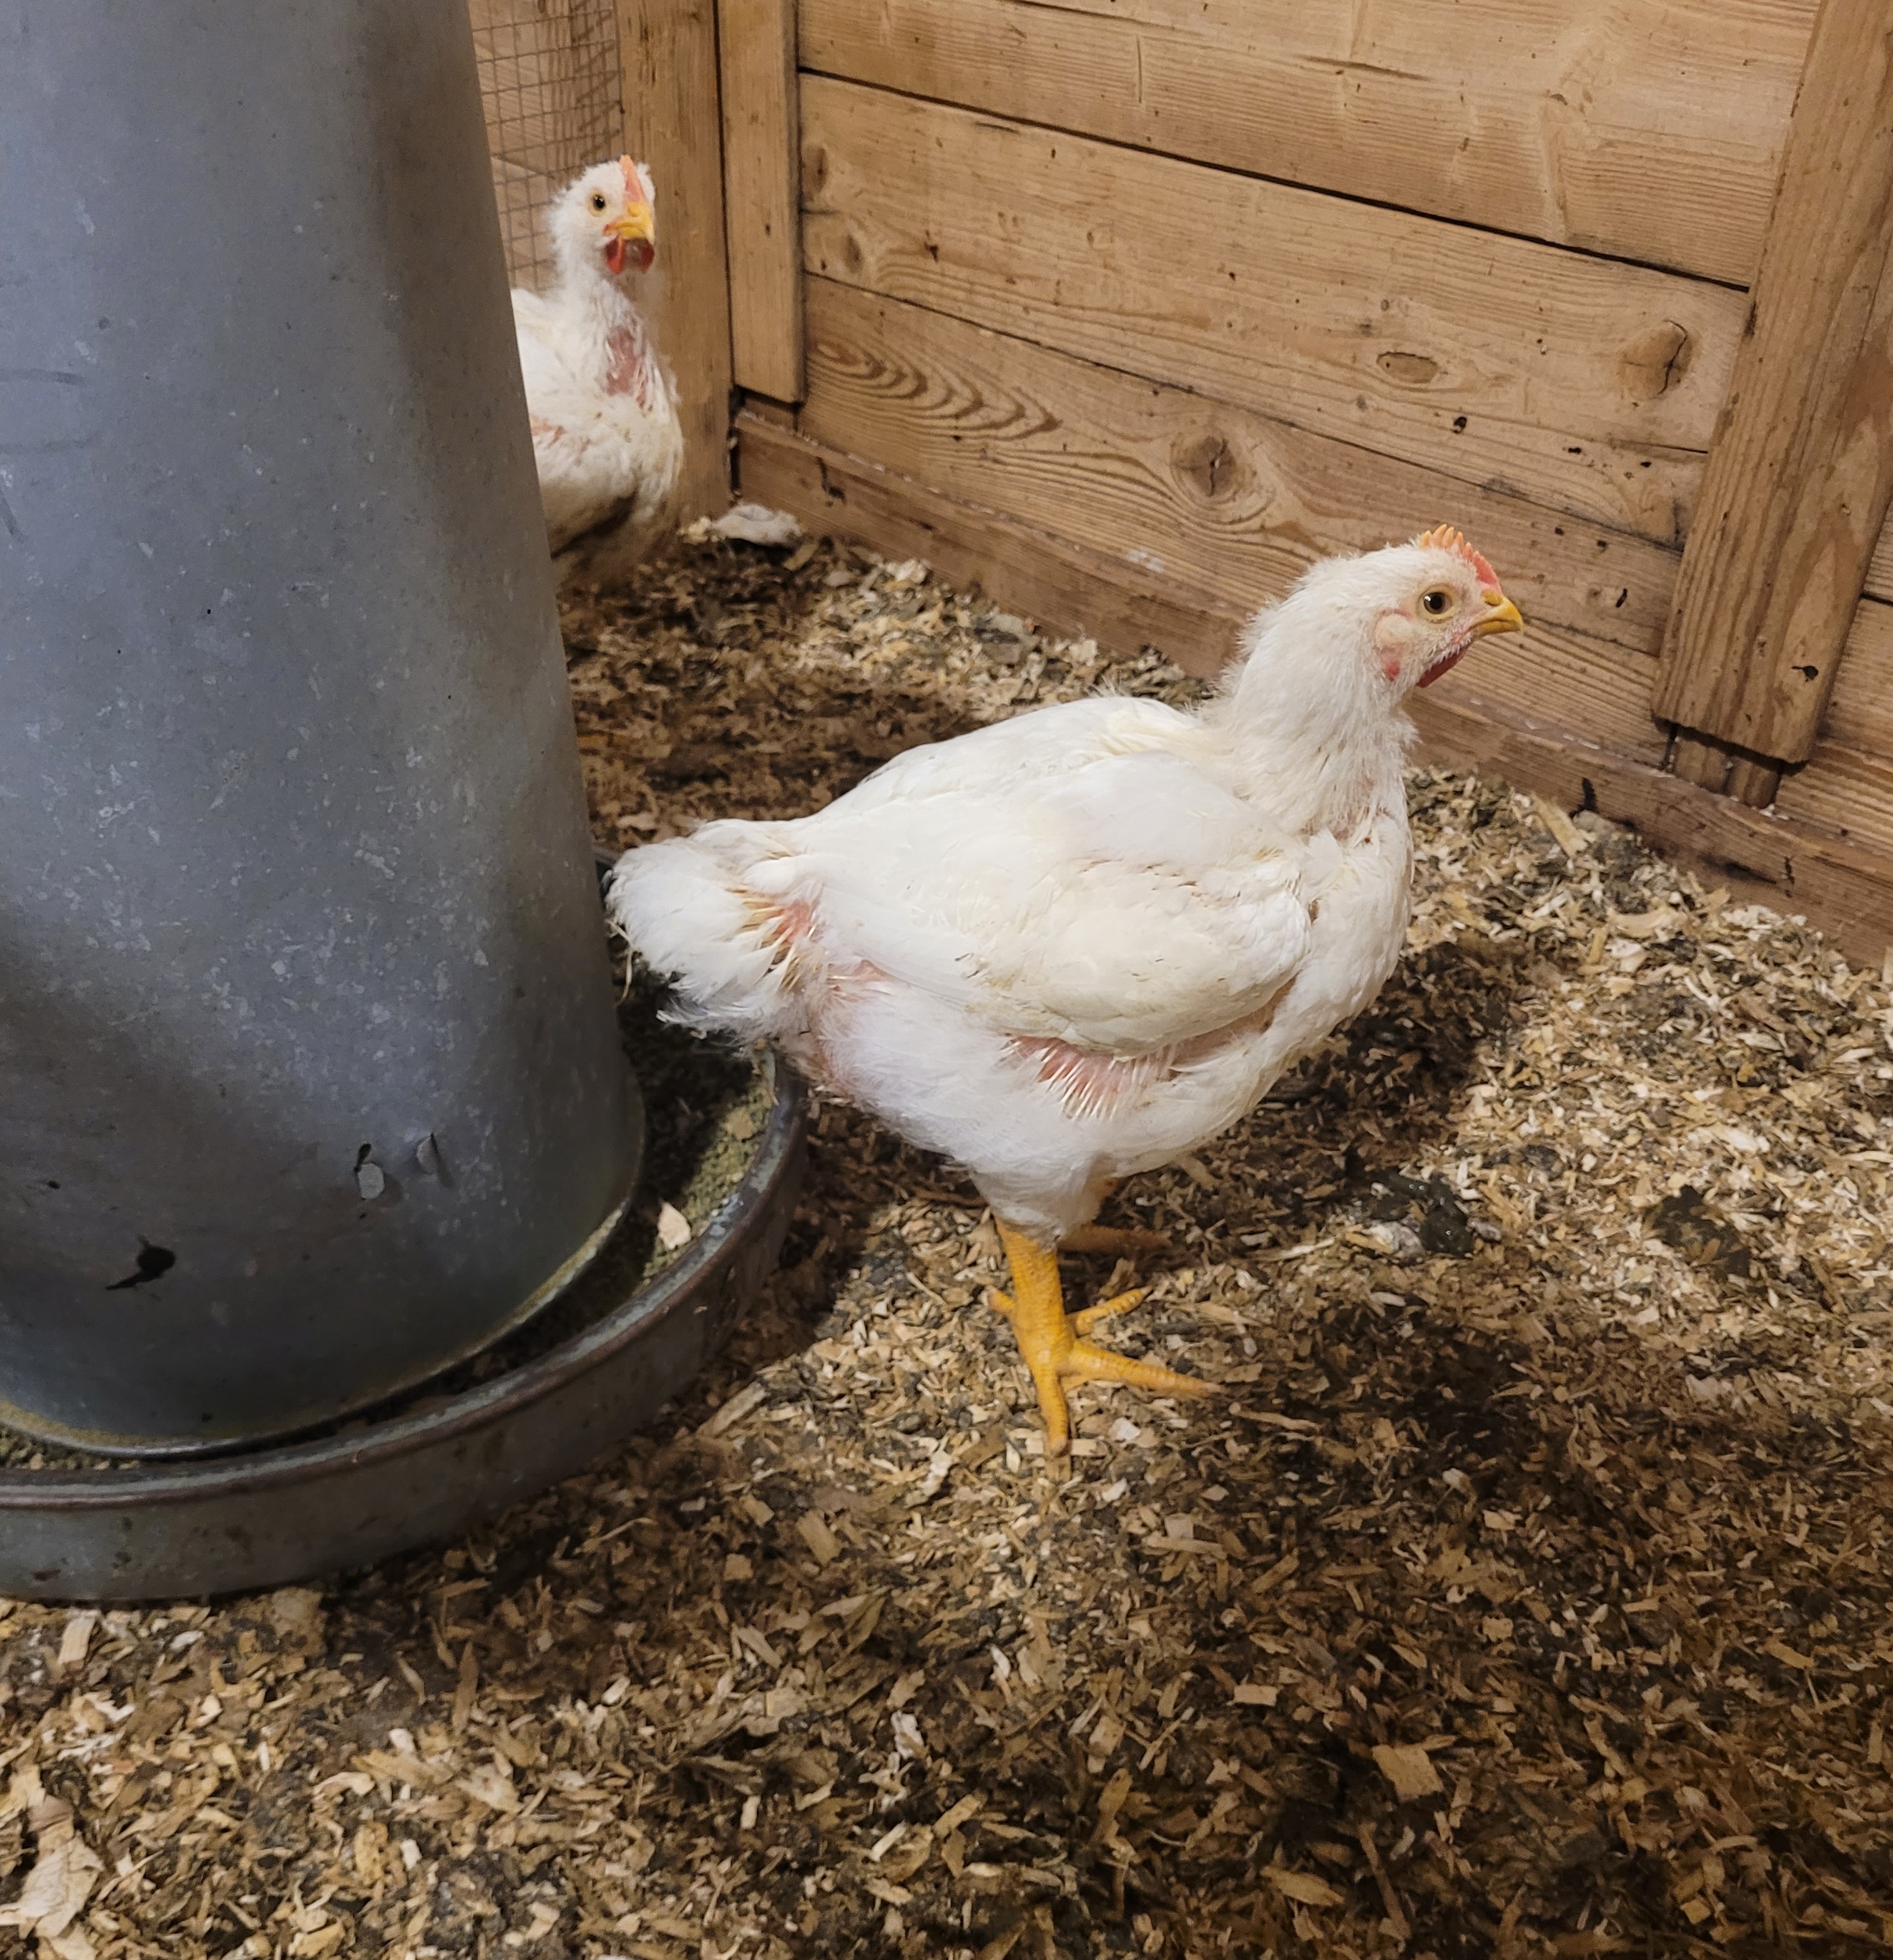 A full-grown white chicken can be seen standing in a chicken shed. There is another chicken in the background.